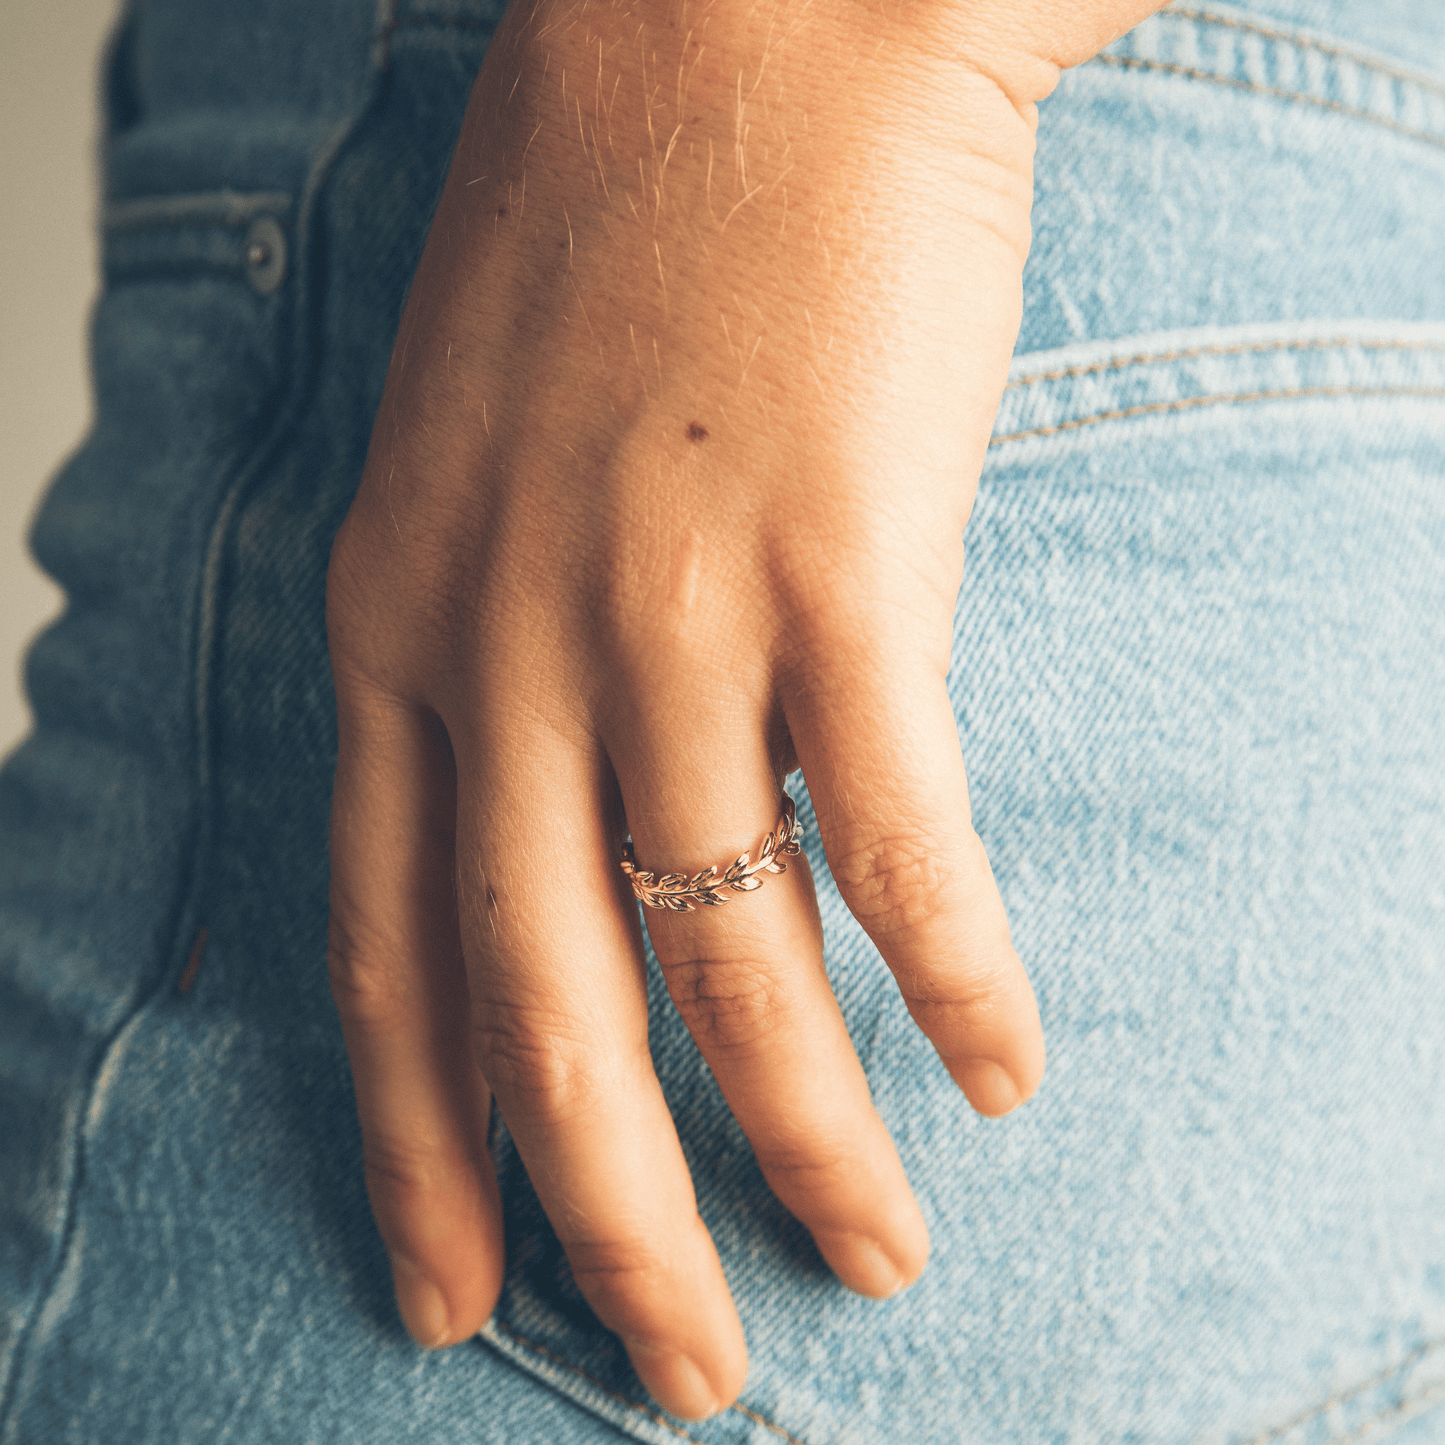 The queen of the forest ring on a woman's hand with hands in pockets.